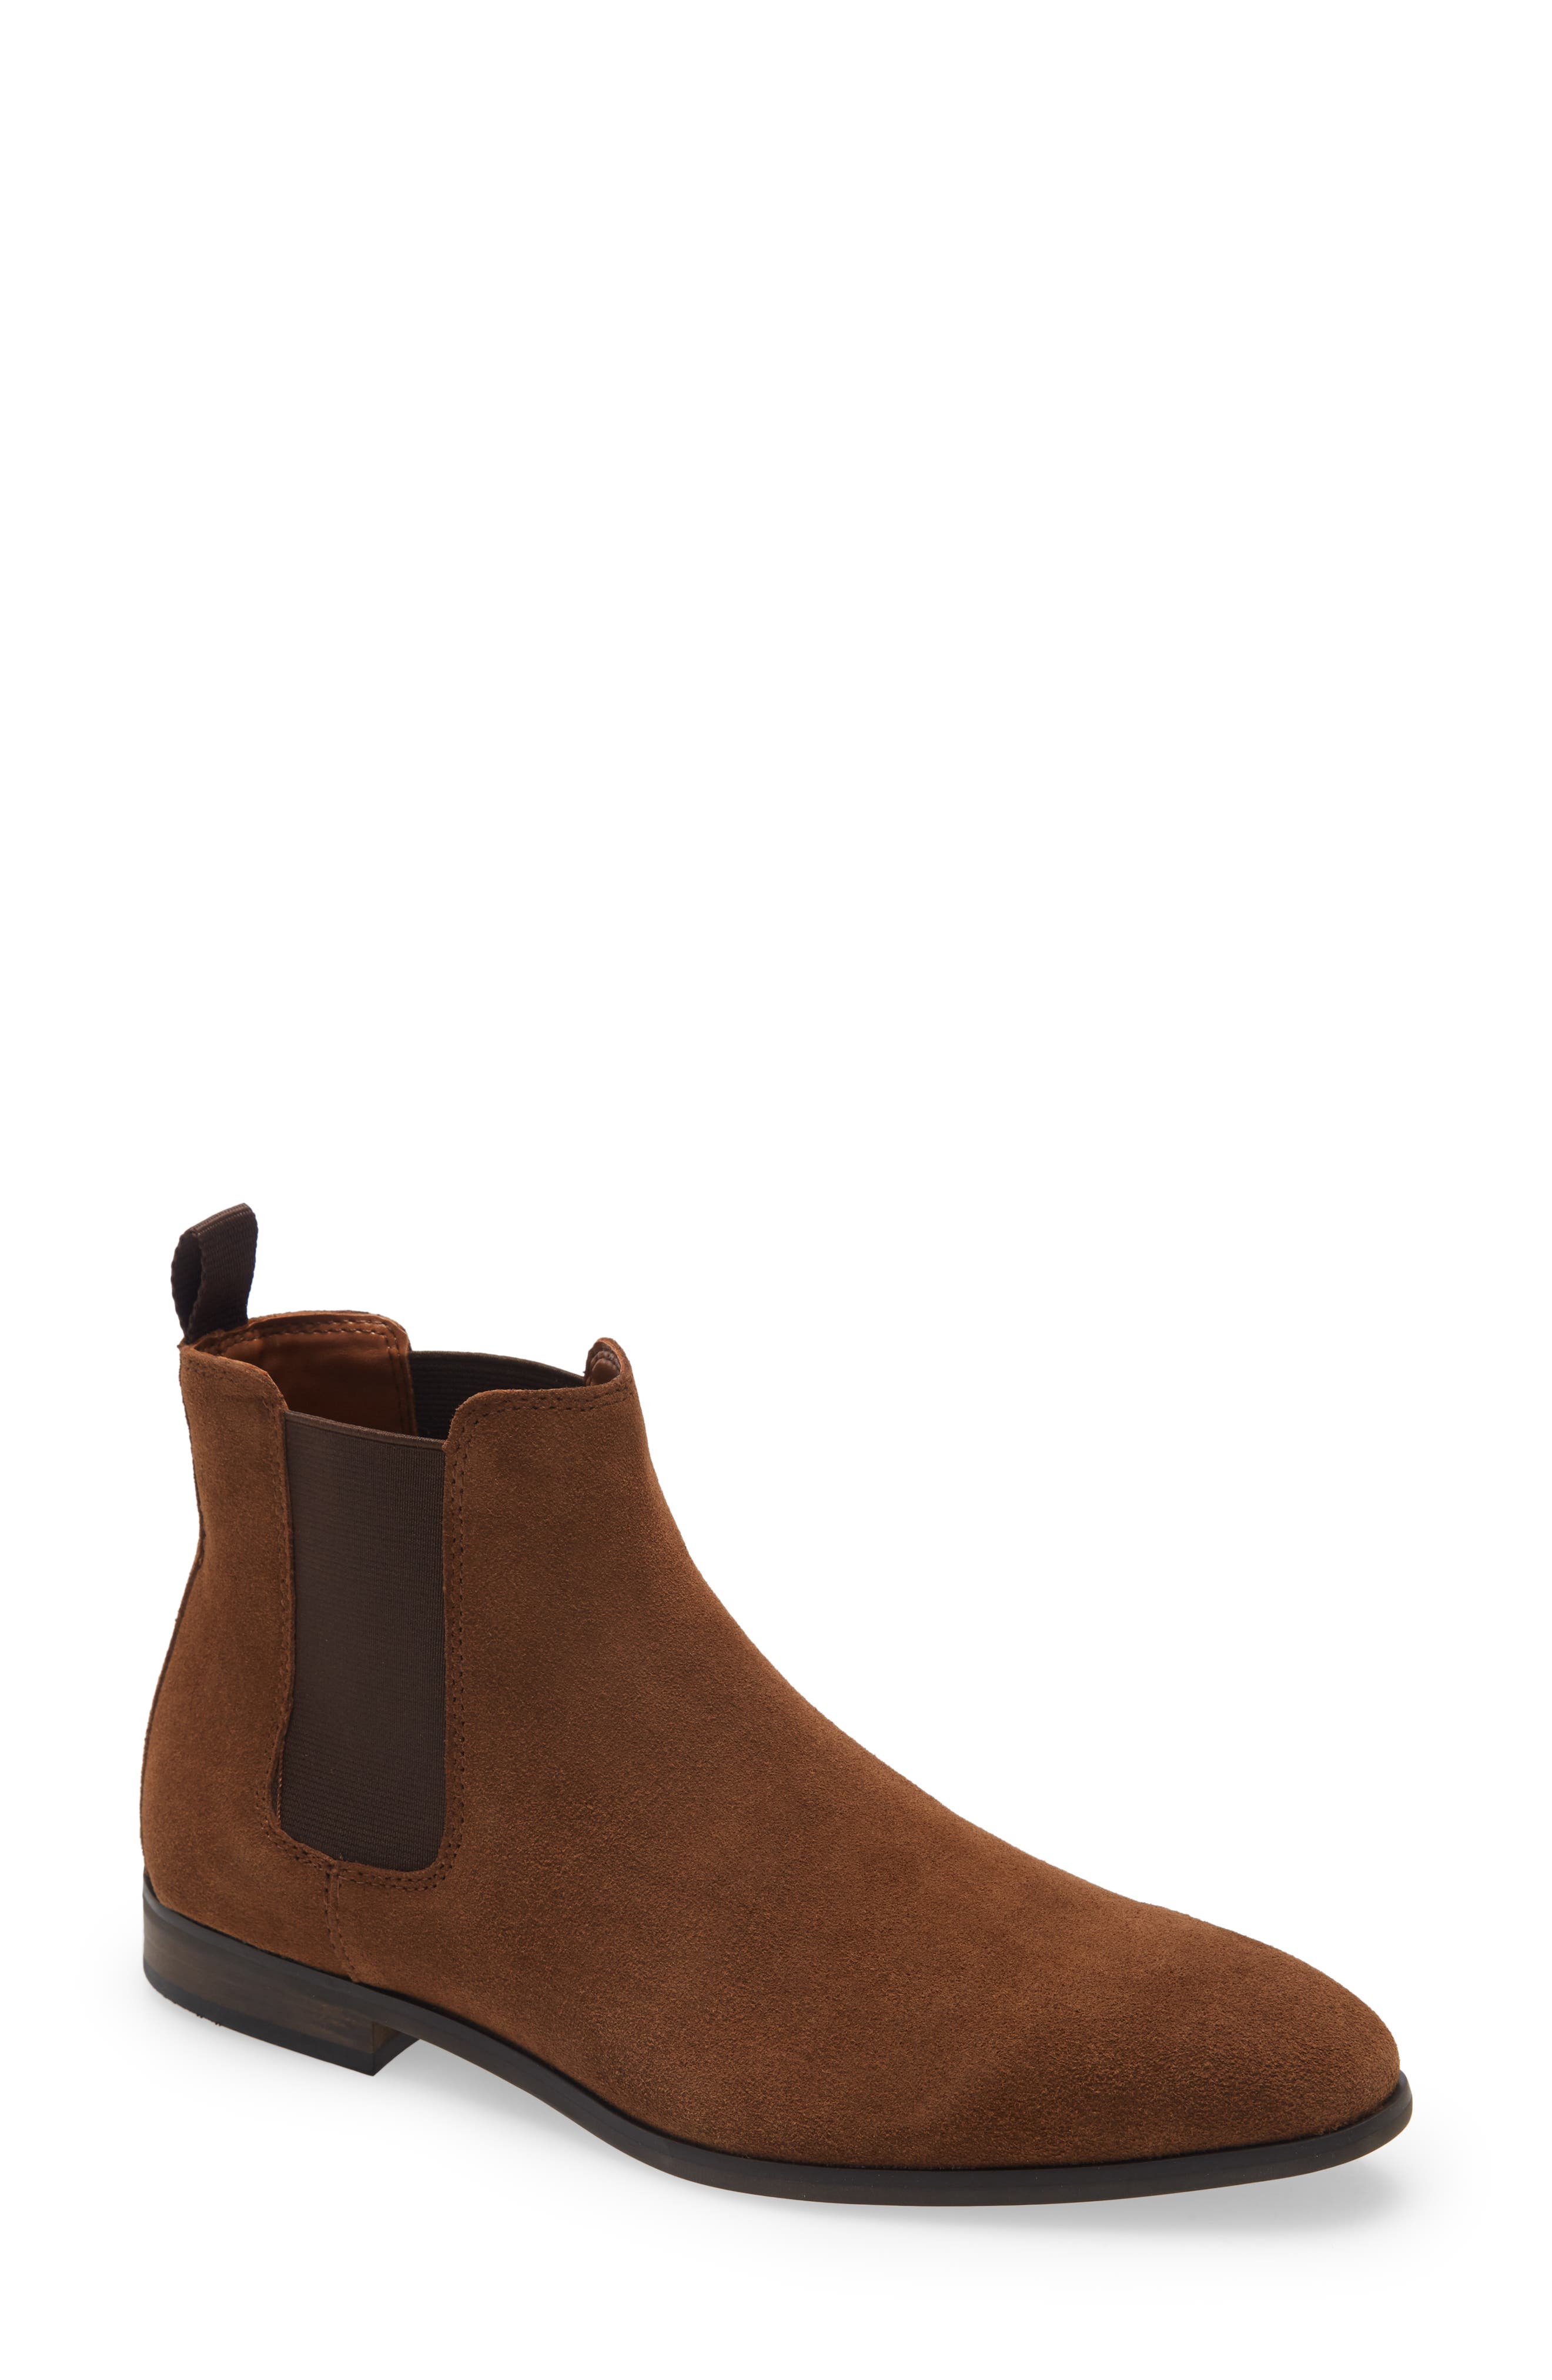 Suede Chelsea Boots Luisaviaroma Men Shoes Boots Chelsea Boots 